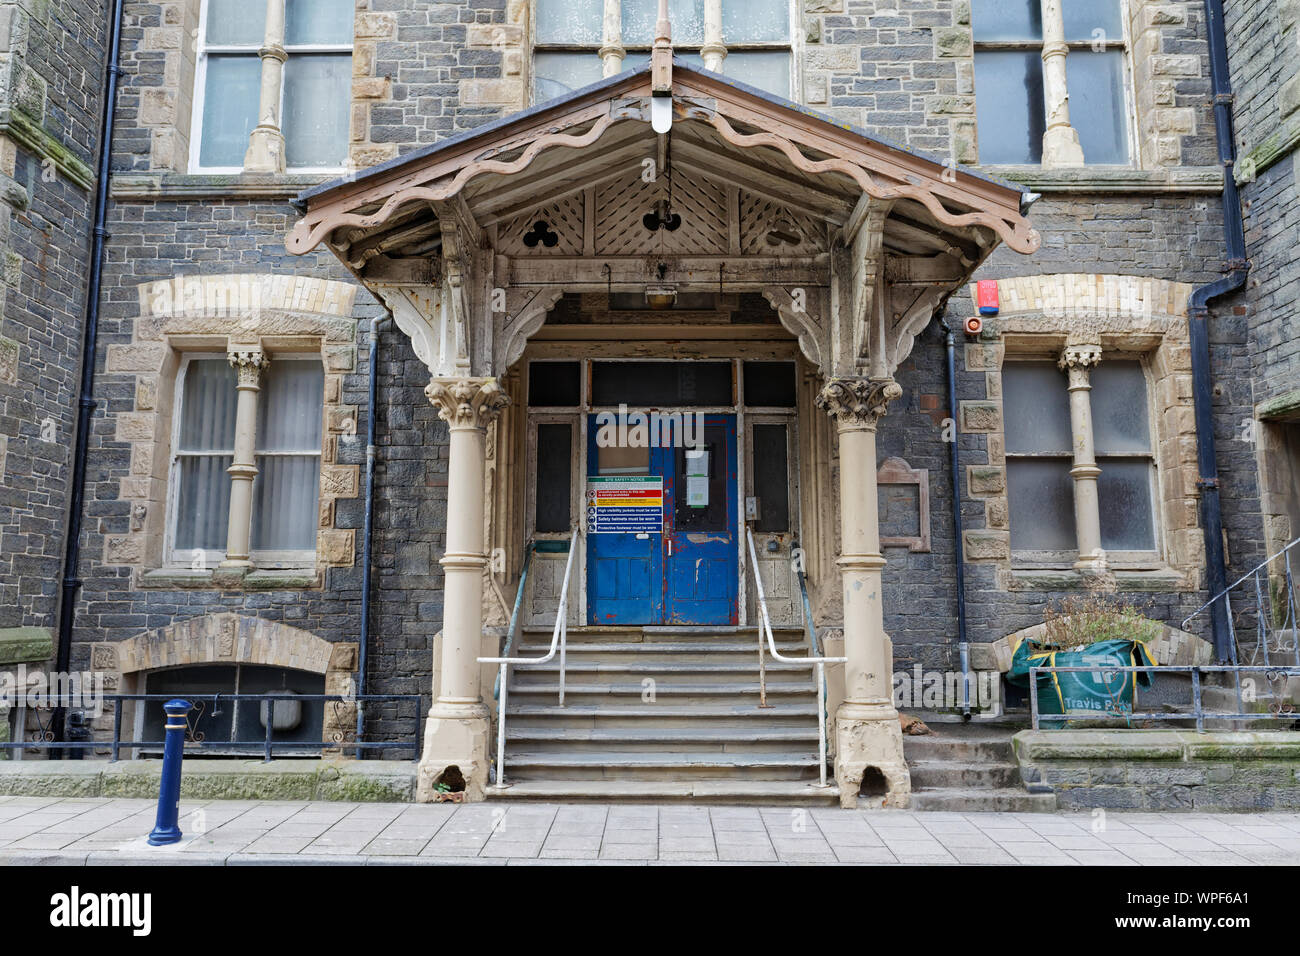 Pictured: The old Police Station in Aberystwyth, Wales, UK. Wednesday 28 August 2019 Re: Opened 1866, built by the Hafod Hotel Co as the Queens Hotel; Stock Photo